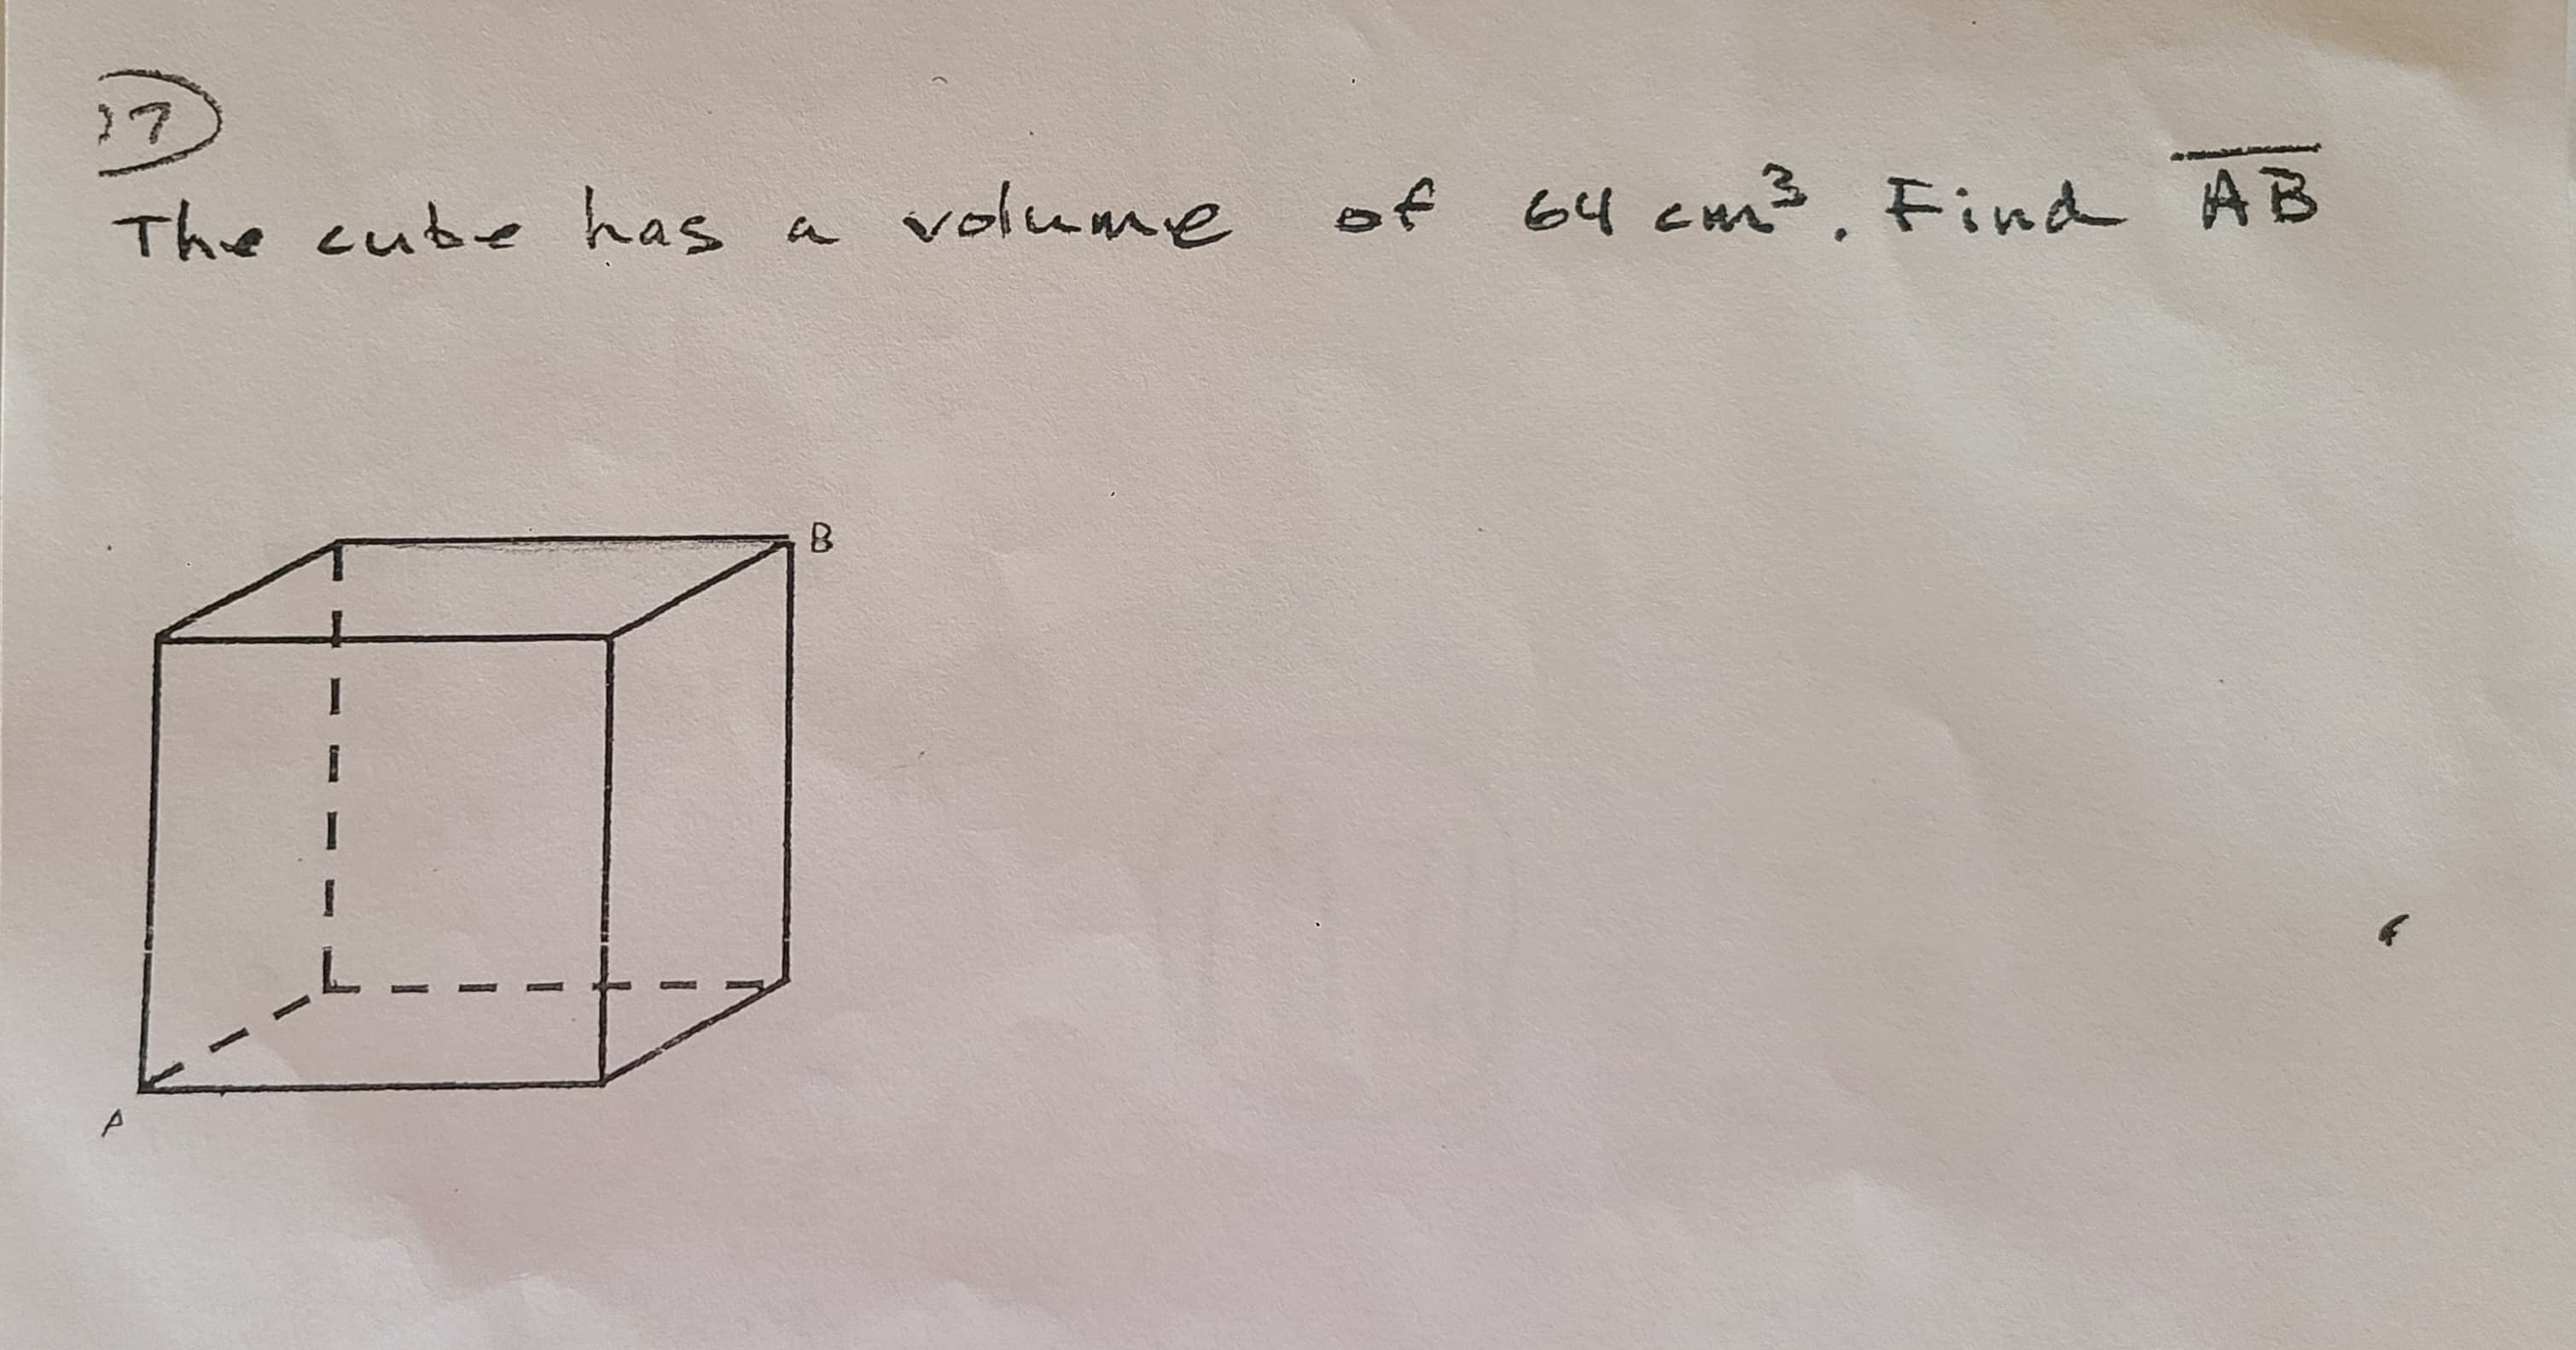 17
The cube has
P
a
B
volume
of 64 cm³. Find AB